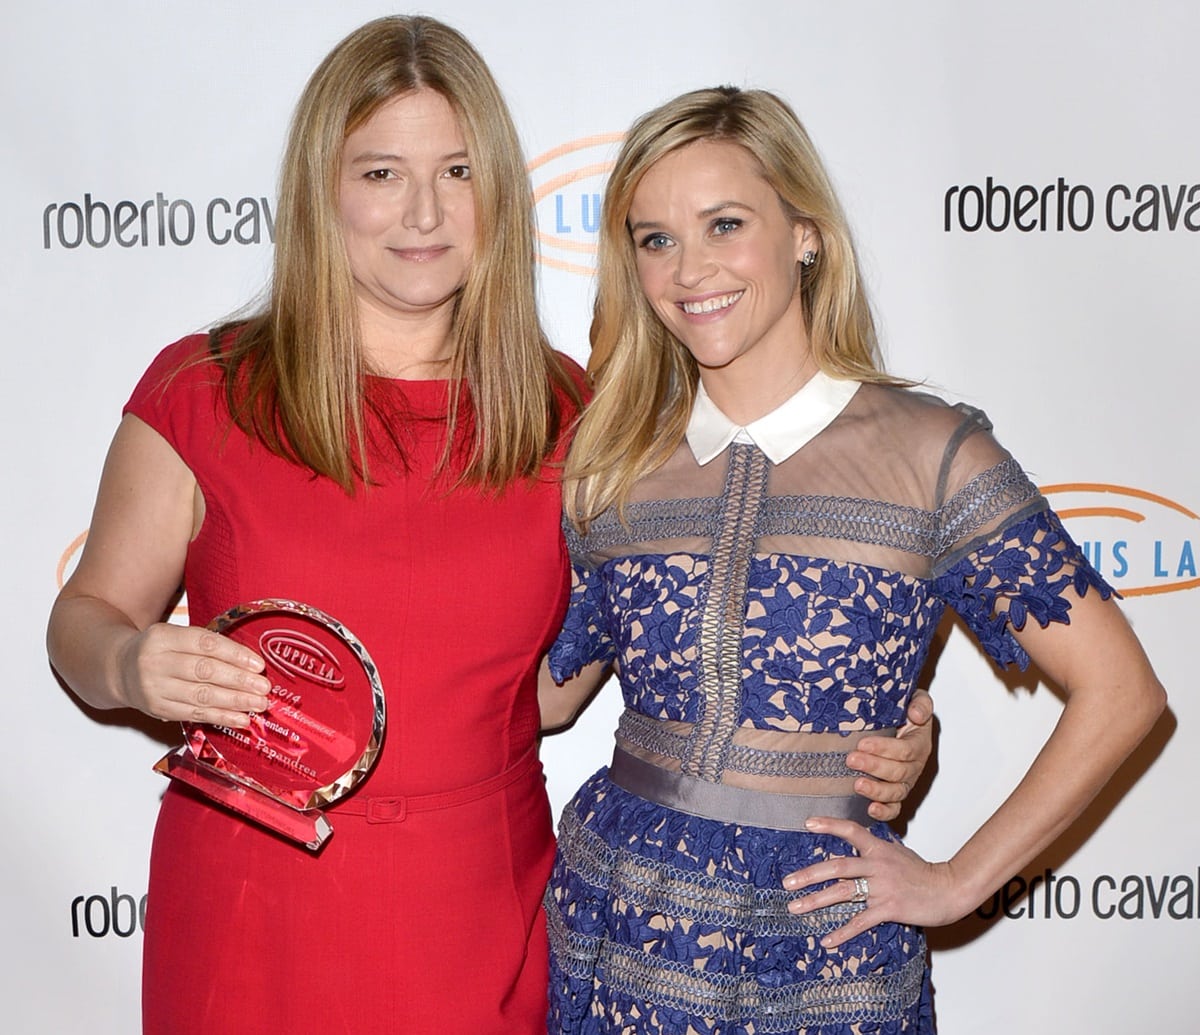 Reese Witherspoon and Bruna Papandrea, the co-founders of production company Pacific Standard, are splitting up